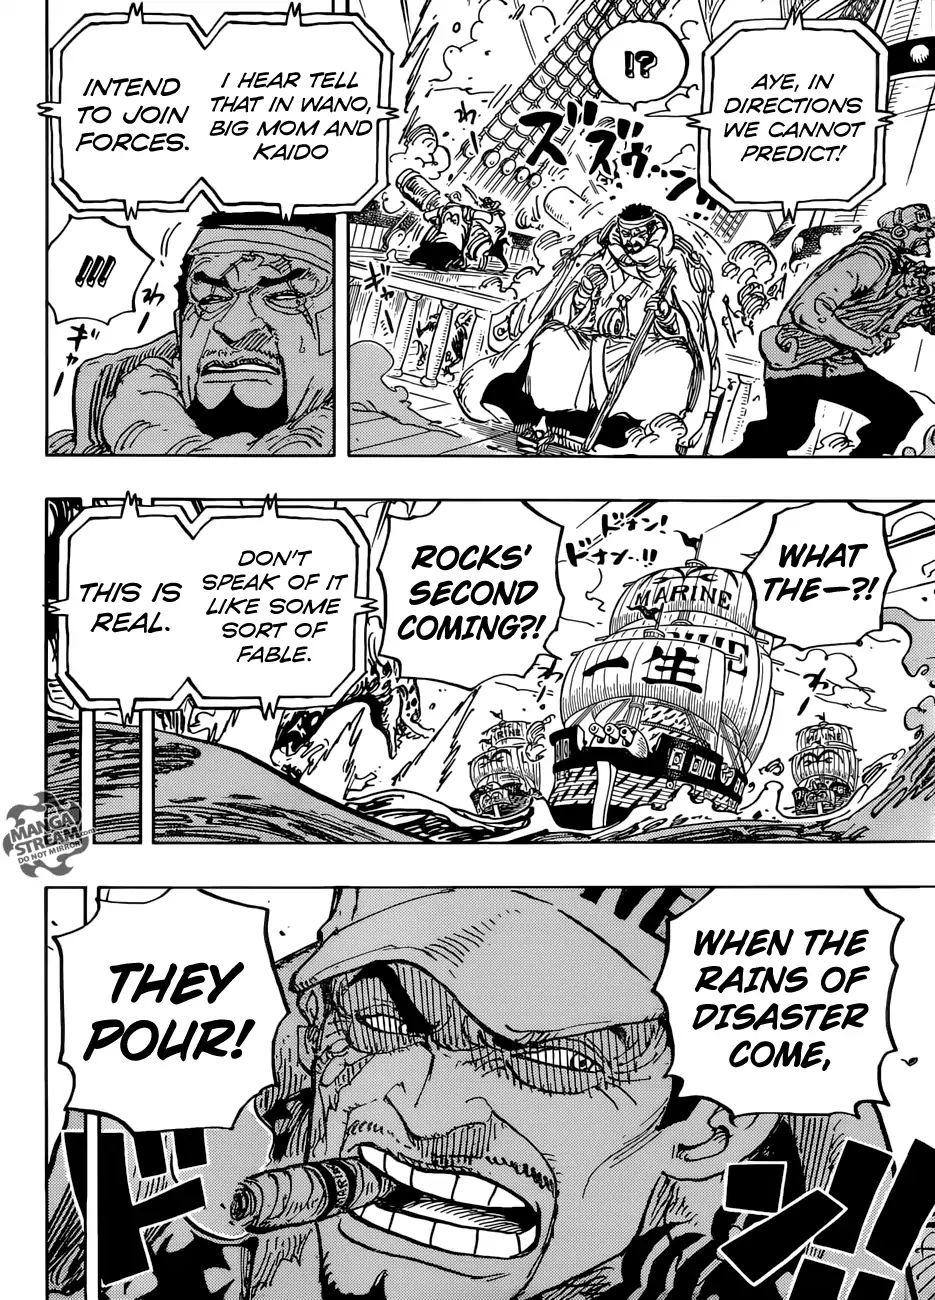 IT'S OVER, HE'S HERE! - One Piece Chapter 1065 (Predictions) 